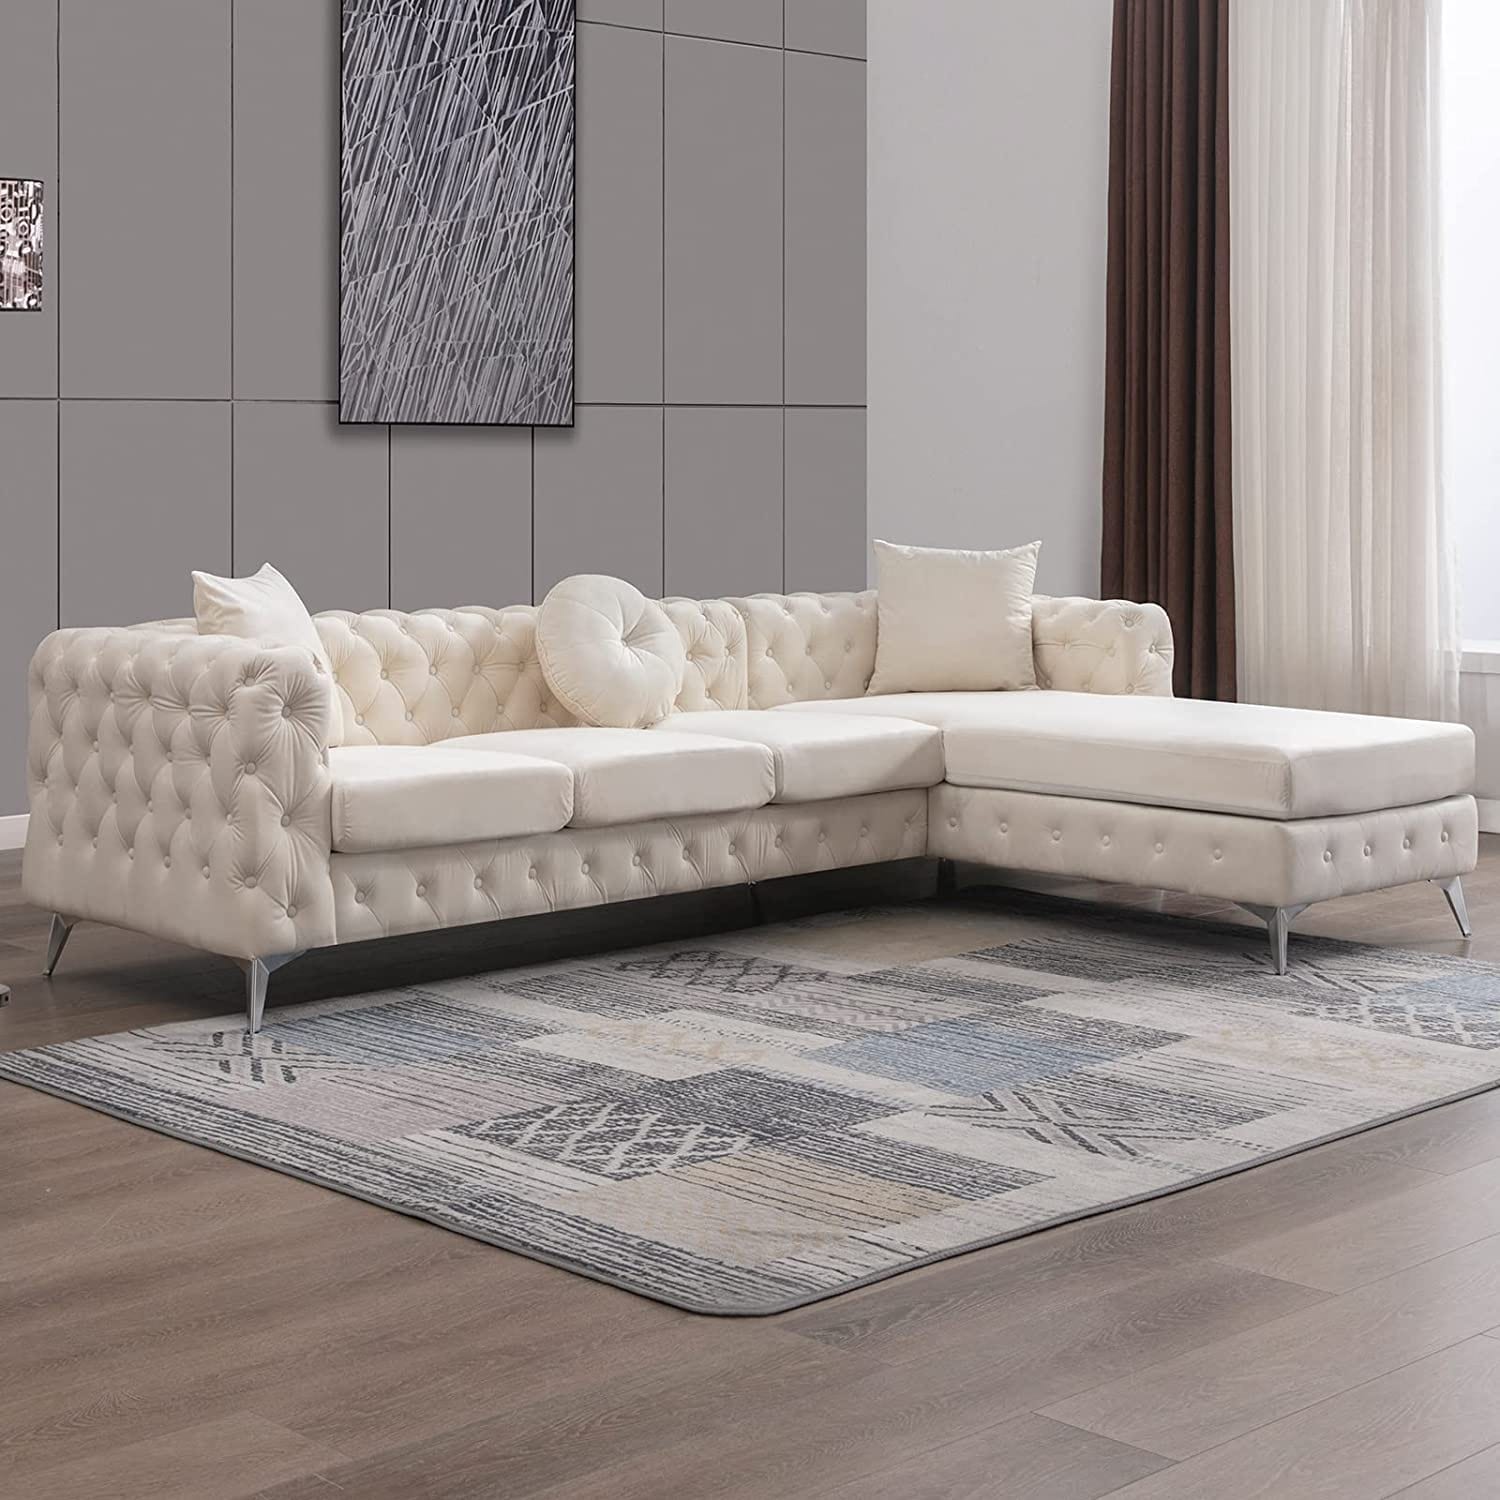 https://ak1.ostkcdn.com/images/products/is/images/direct/4033fd39828327e3213ded4dcff0304383e24440/Mixoy-Sofa-Couches-Set-with-Deep-Button-Tufted%2C6.7%22-Thicken-Cushion-for-Office-Bedroom%2CIron-Legs.jpg